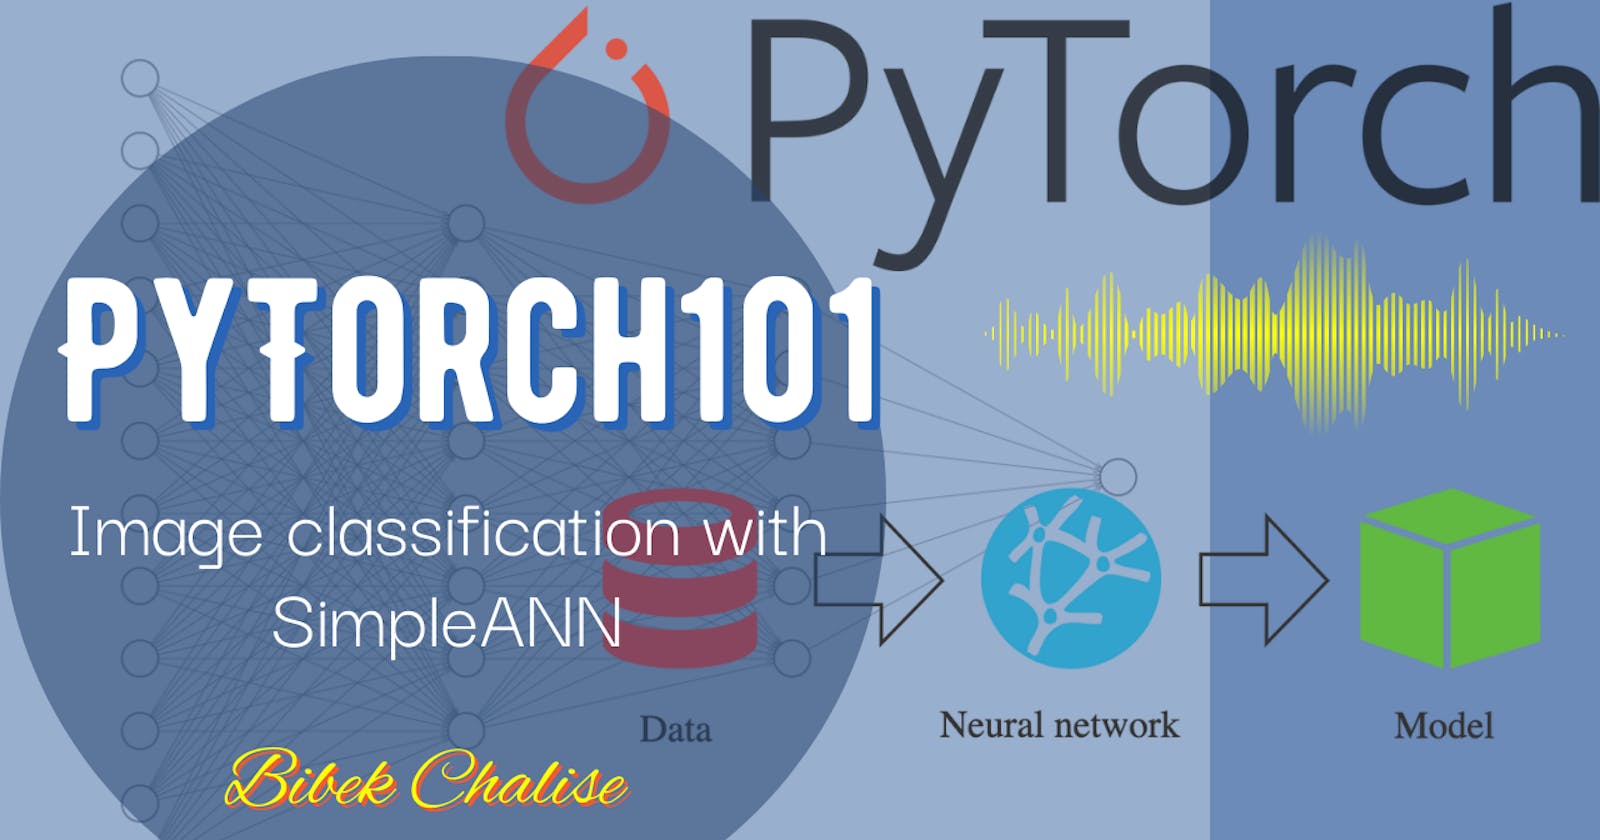 PyTorch 101: Image classification with SimpleANN